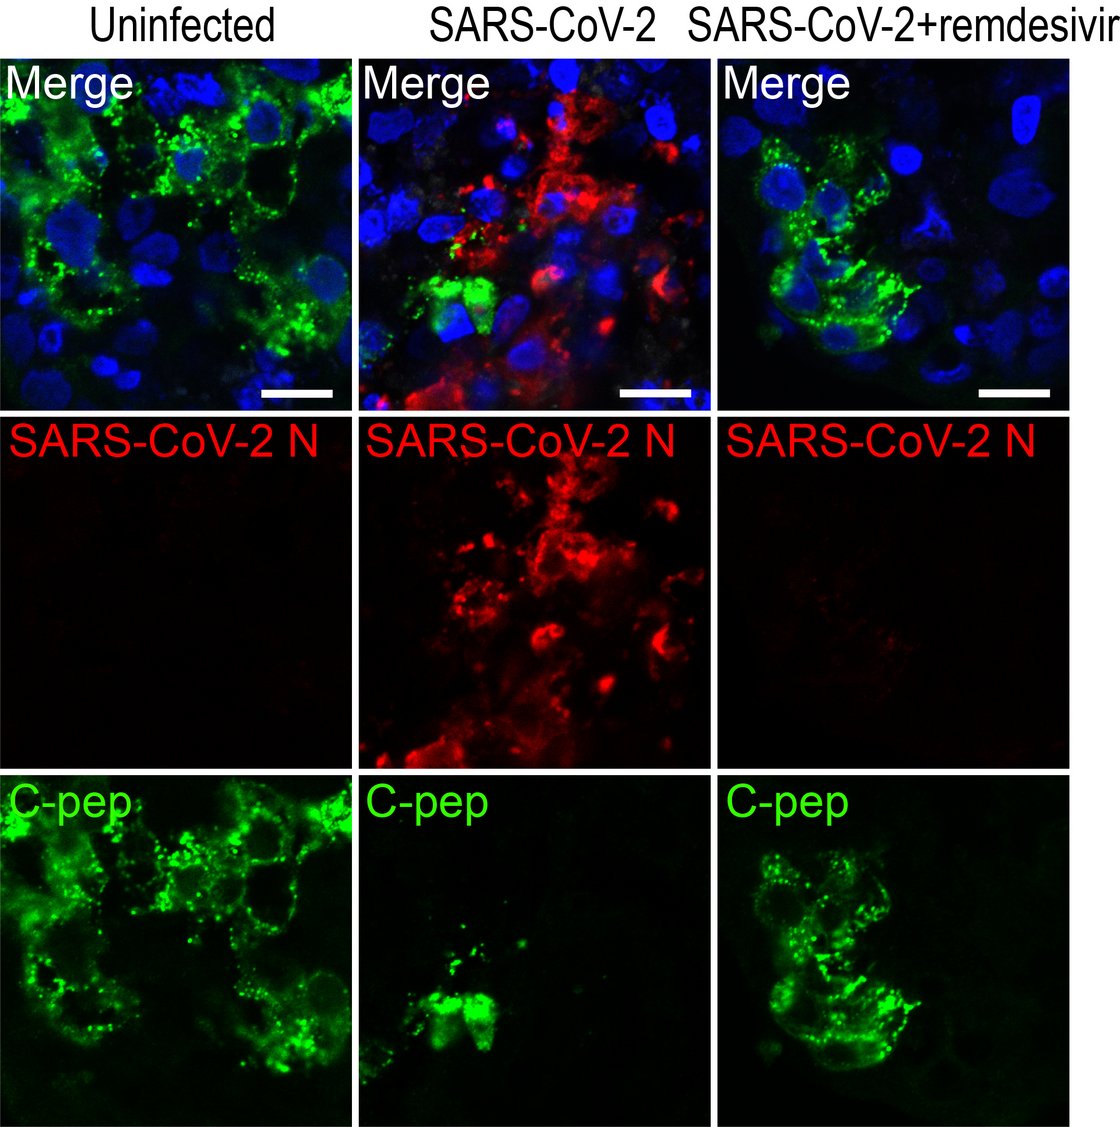 Human pancreatic islets infected with SARS-CoV-2, stain positive for SARS-CoV-2 N protein. Treatment with remdesivir, a polymerase inhibitor with potent in vitro anti-SARS-CoV-2 activity, efficiently blocked viral infection.